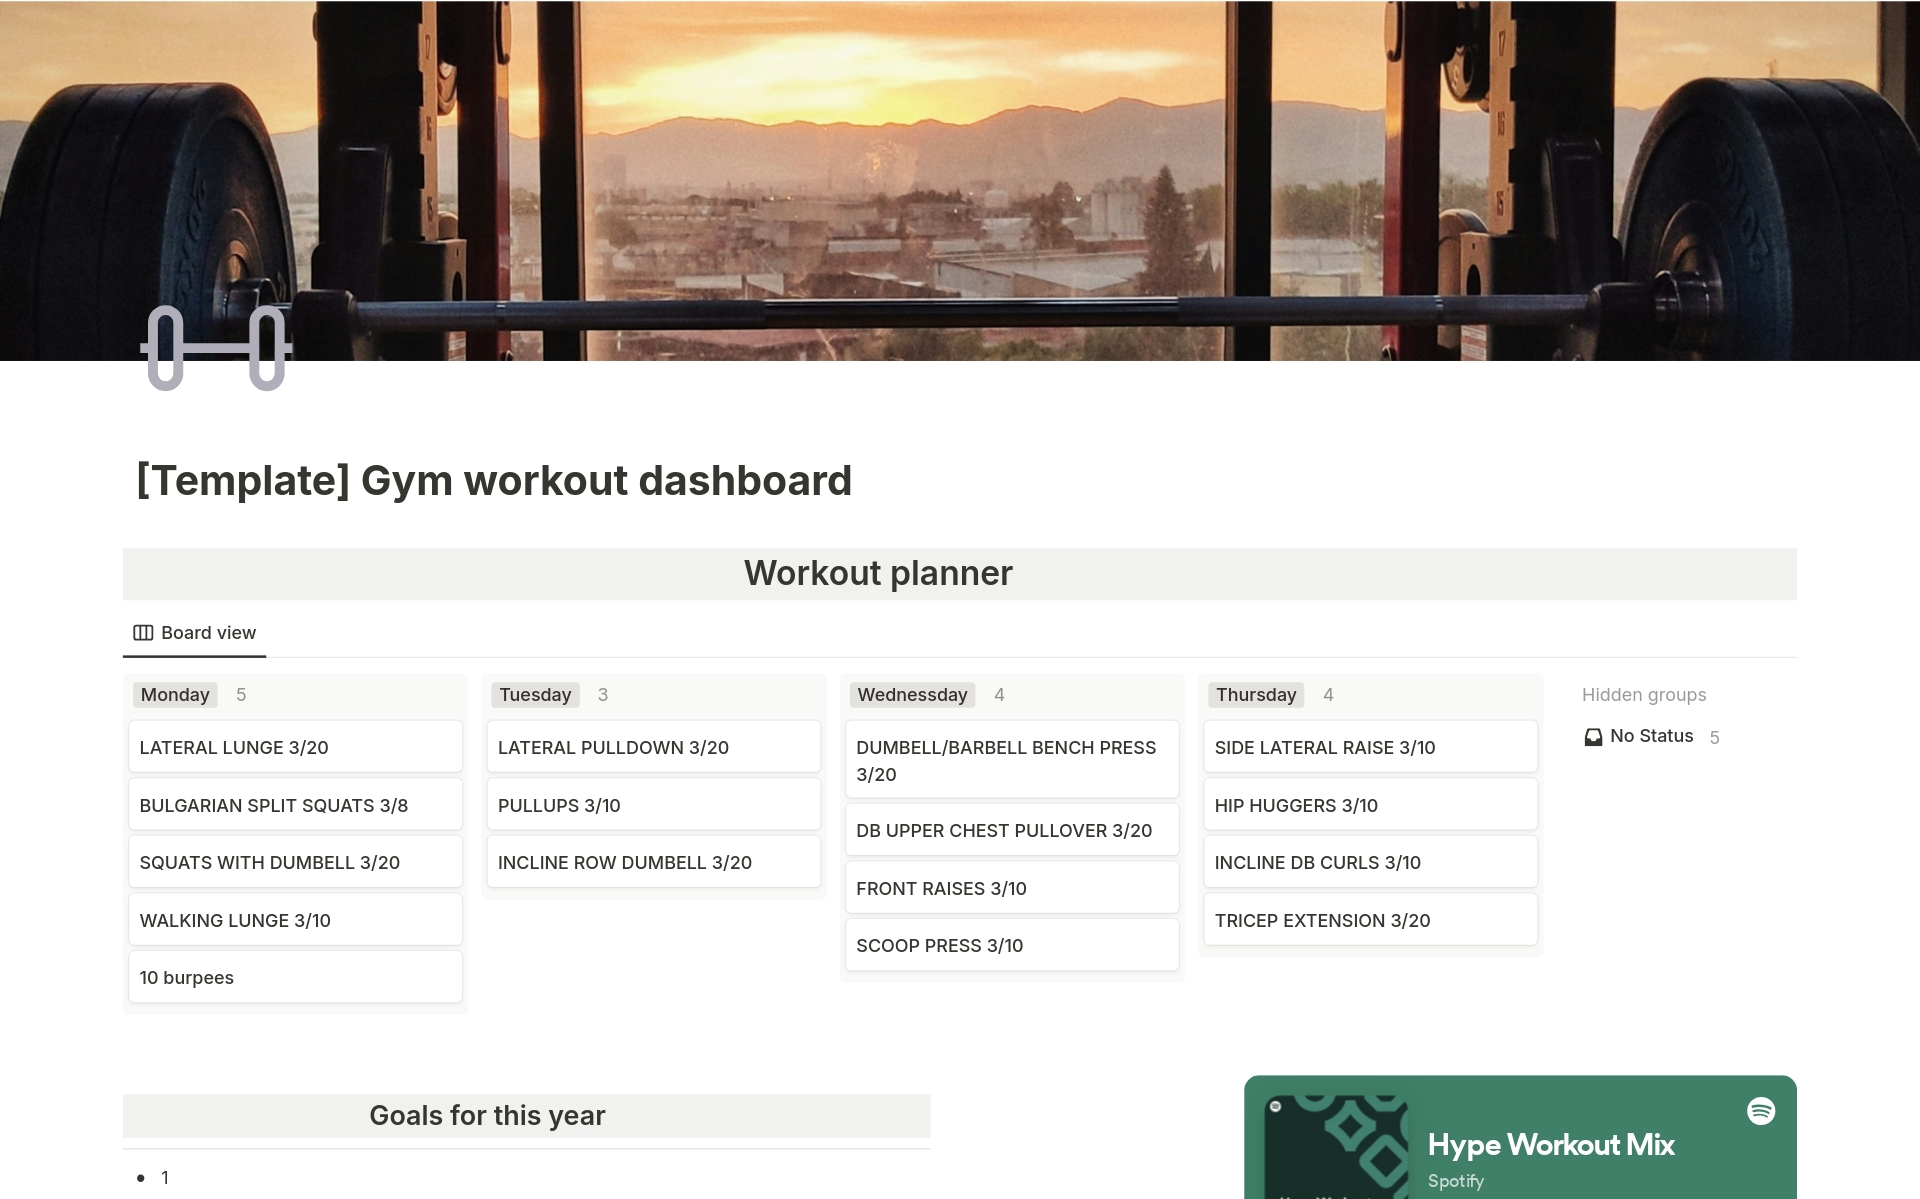 Take control of your fitness journey with the Notion Fitness Planner Template- an all-in-one solution to help you achieve your health and wellness goals.